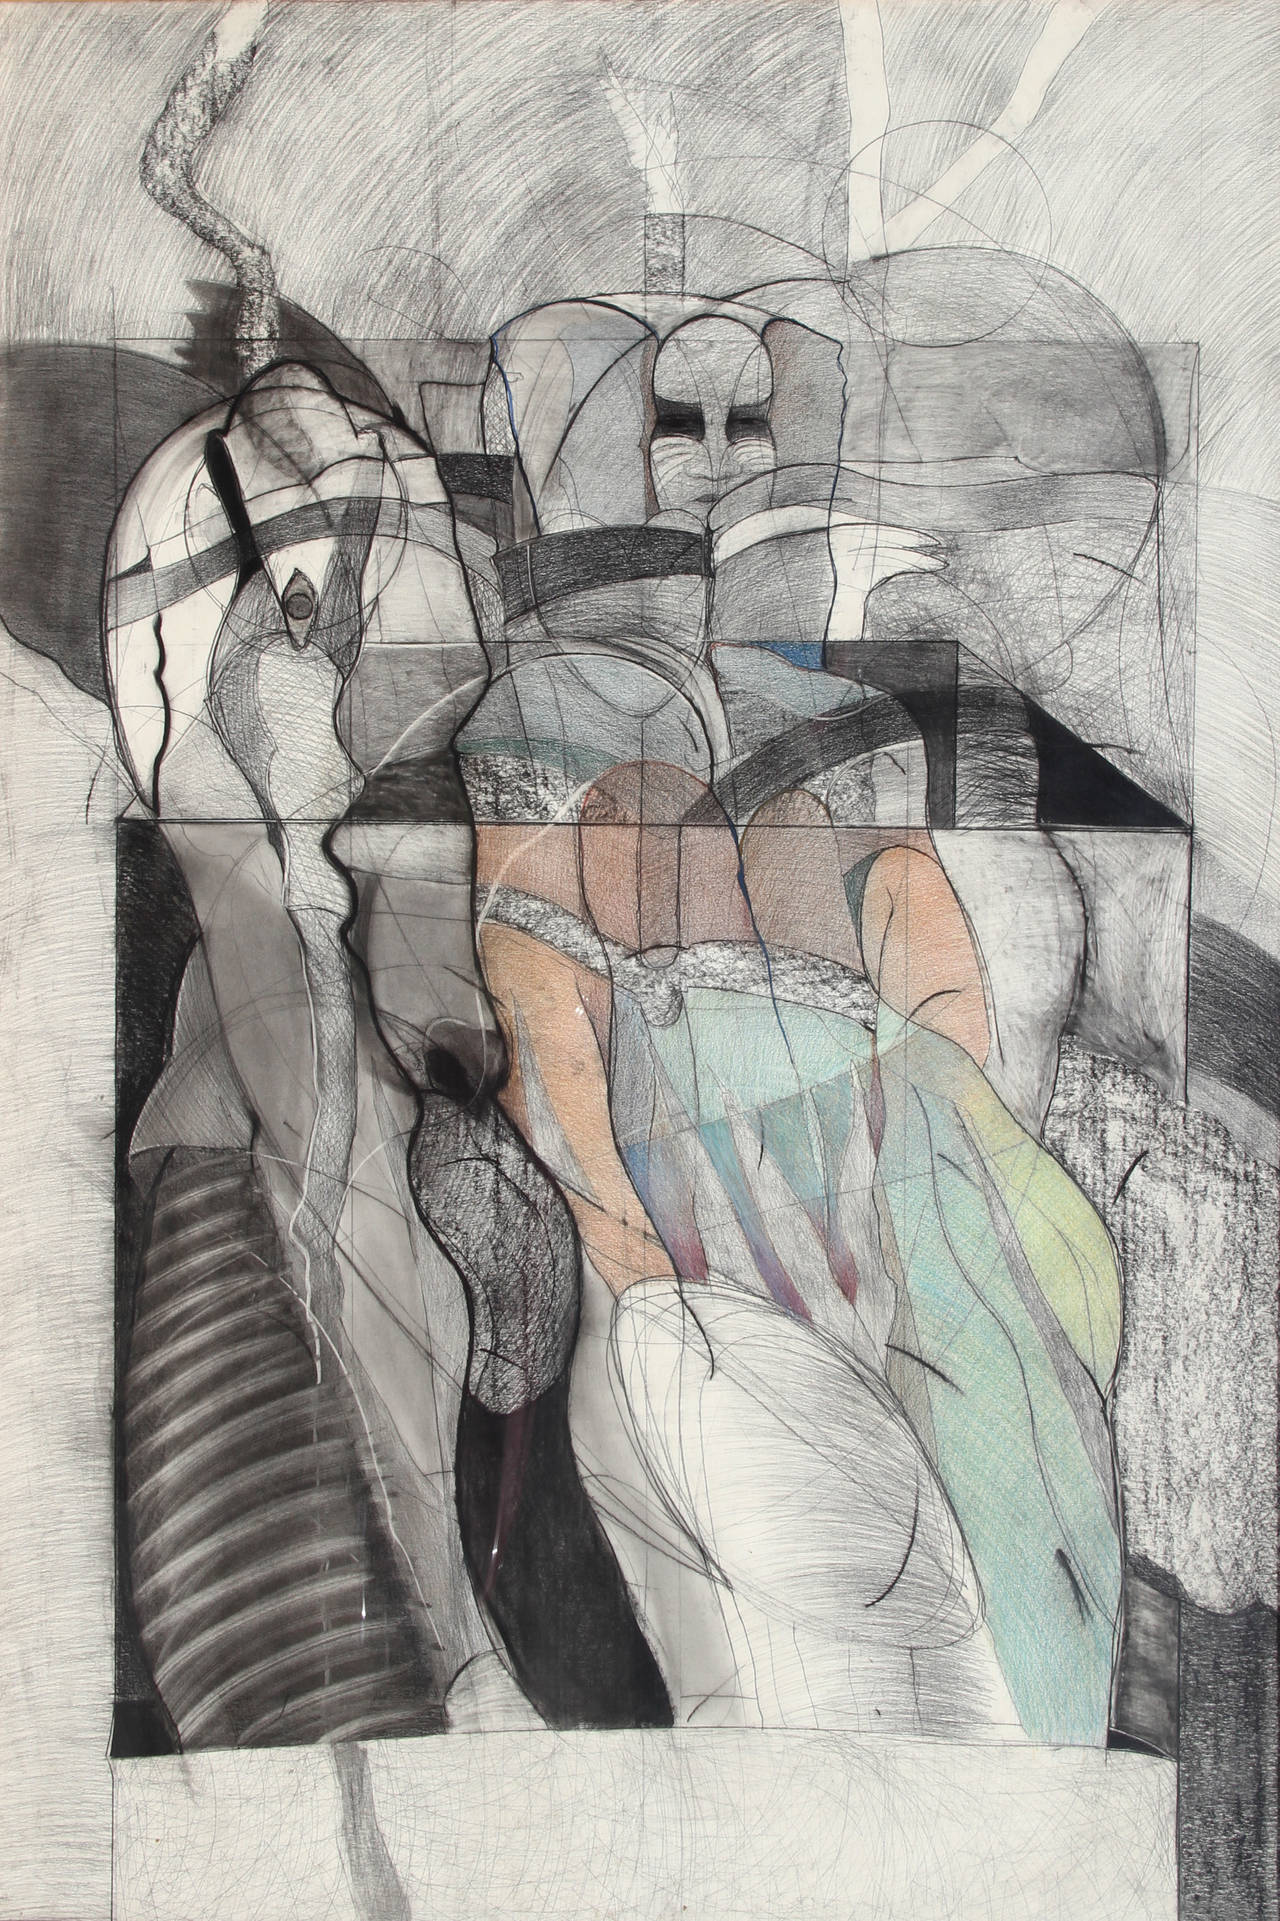 A mixed media drawing by Michael Platt from 1981. A representational image of a figure in a cool, subdued color pallet. Platt creates artwork that centers on figurative explorations of life’s survivors, the marginalized, referencing history and